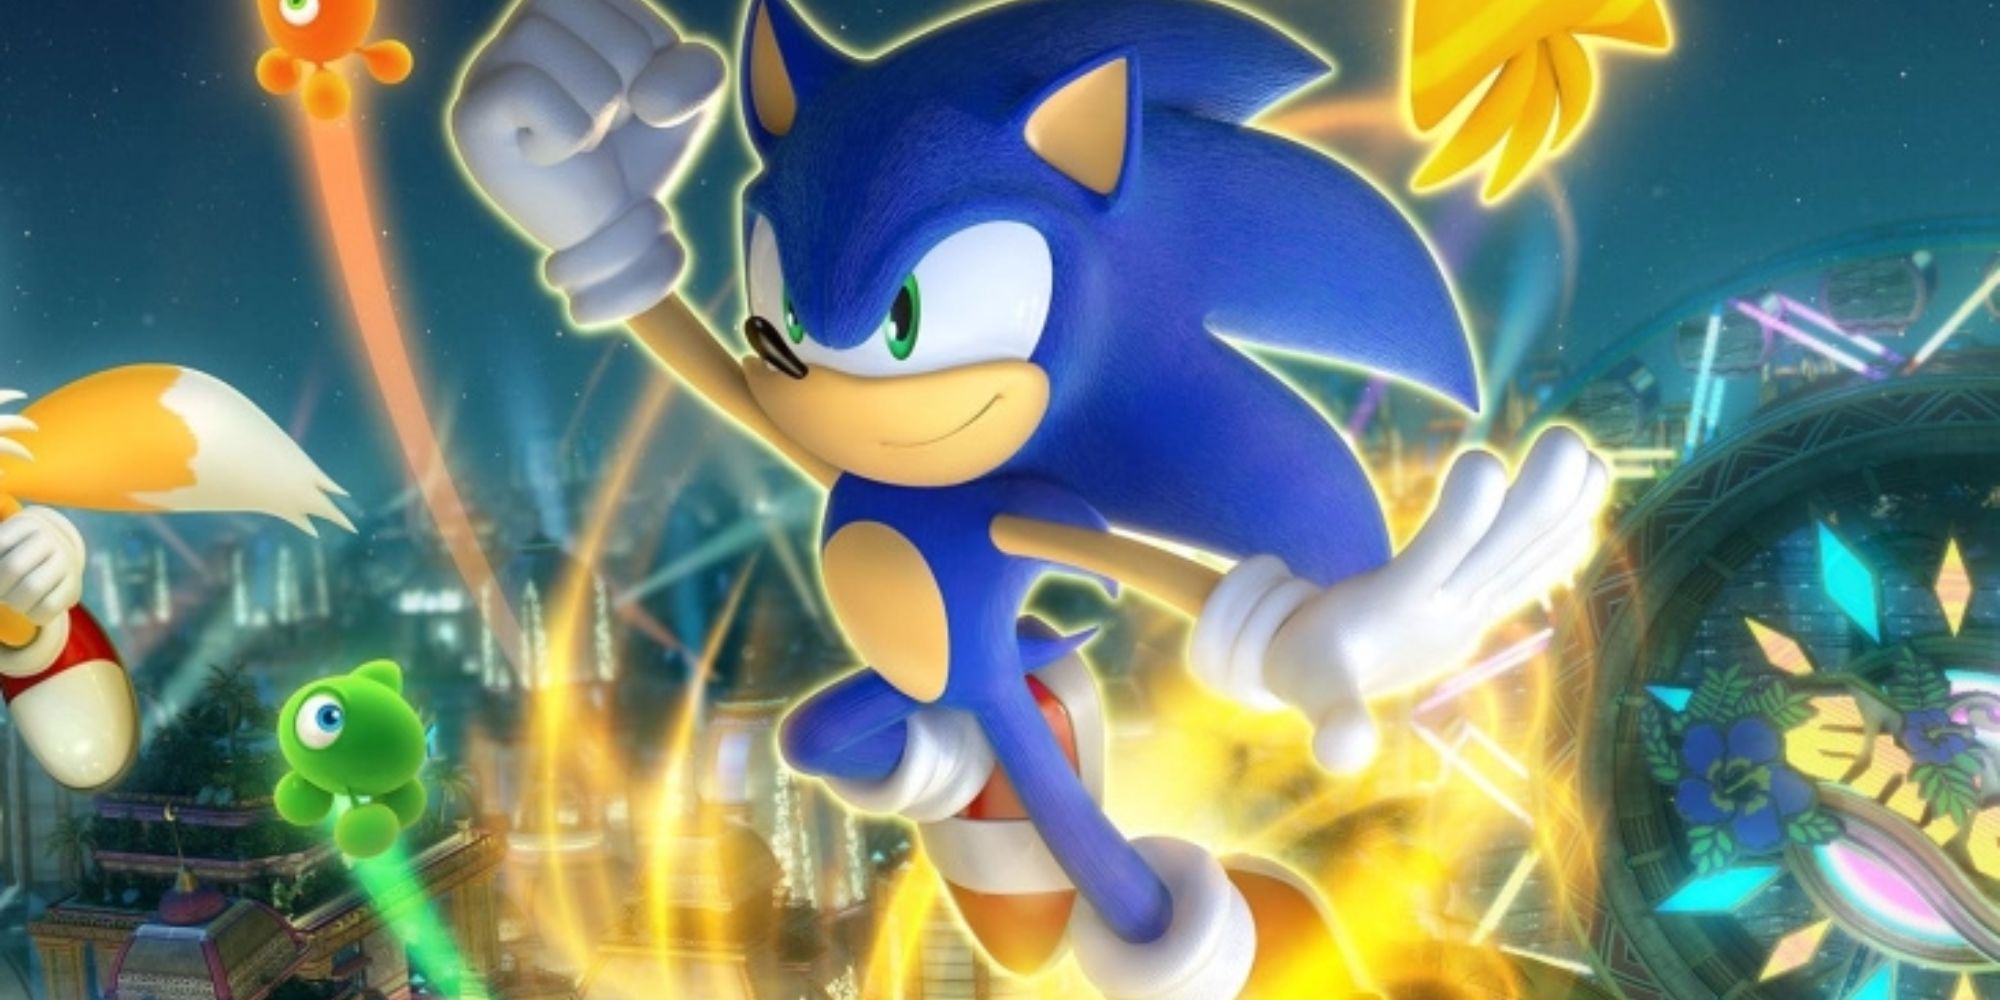 Sonic Flying with Trails and the Wisps in Star Light Zone